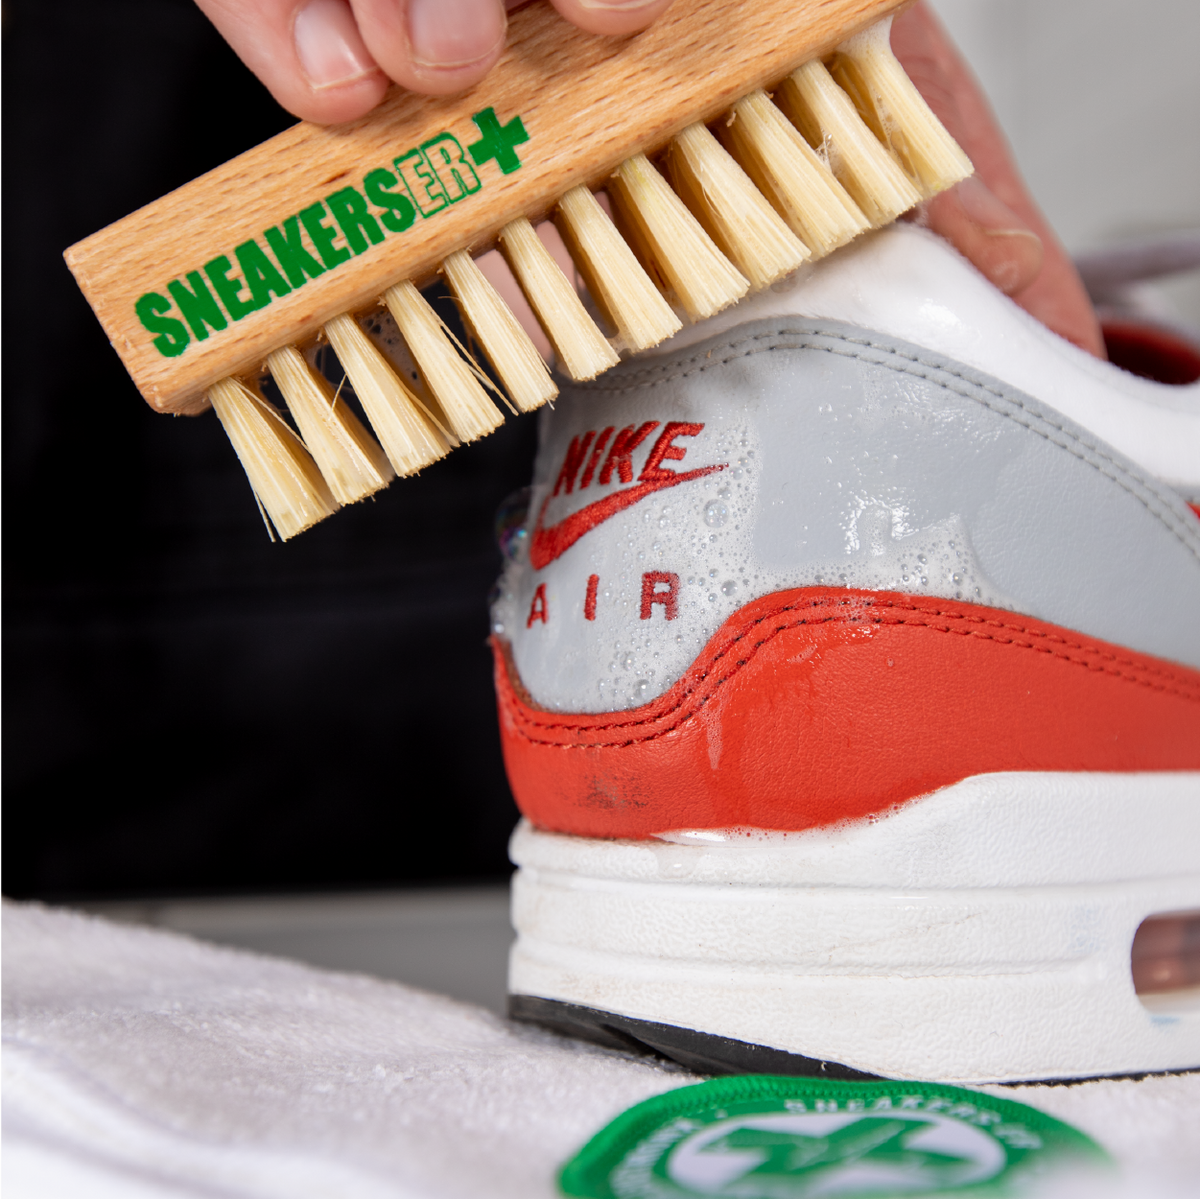 SNEAKERS ER PREMIUM CLEANER &amp; PROTECTER DUO with FREE 5 Pack Wipes